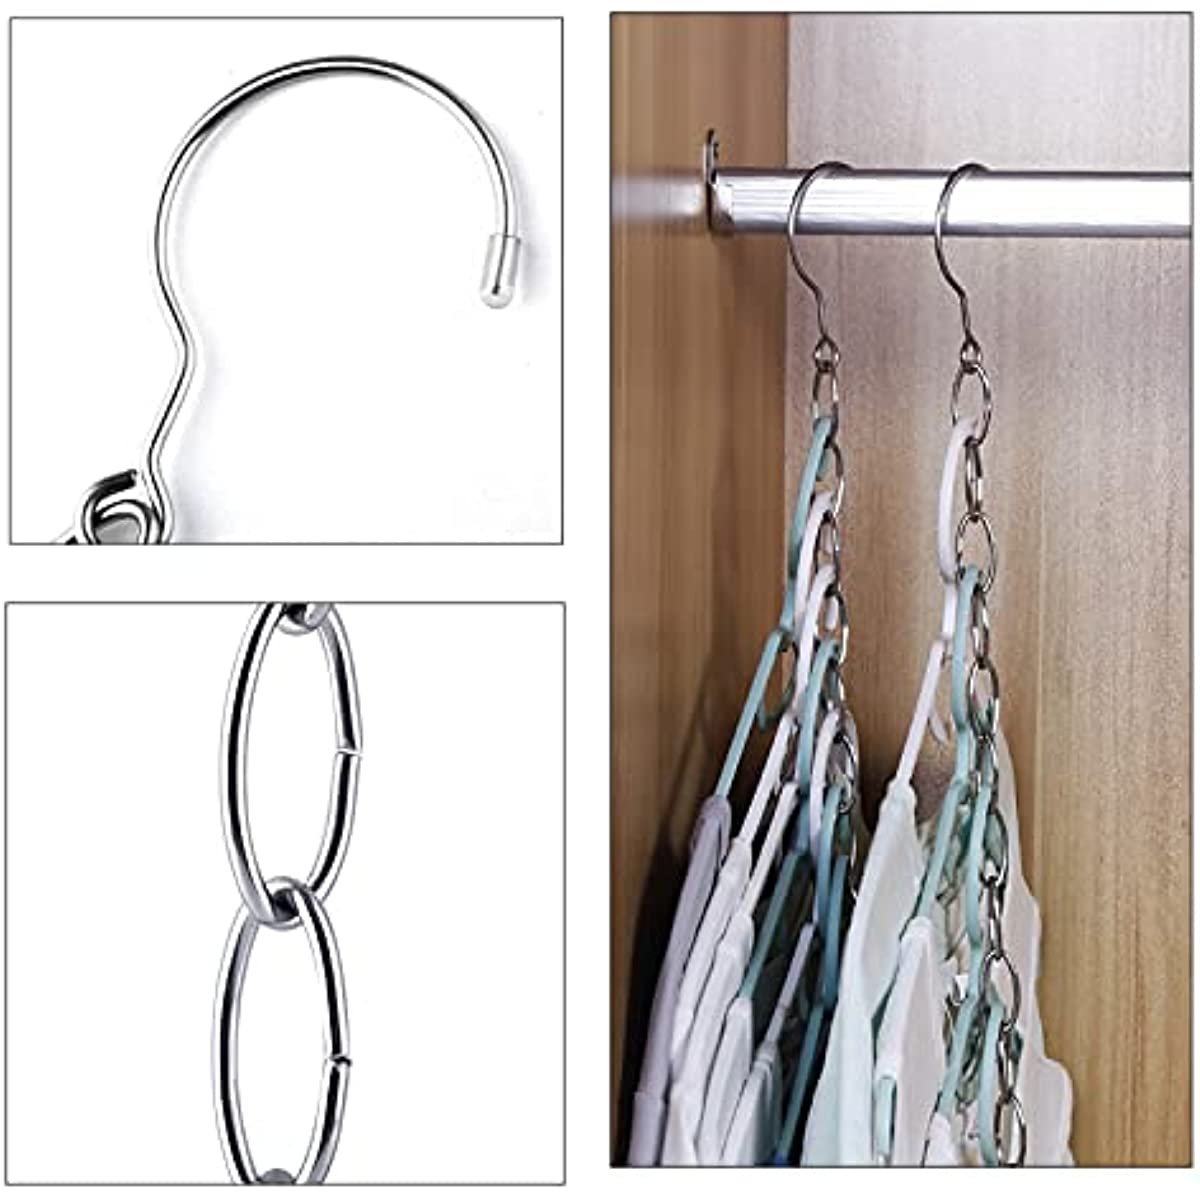 Liangmall Hangers Space Saving Upgraded, Expand 6 to 9 Holes Magic Clothes  Hanger Organizer, Stainless Steel Space Saving Hangers Closet Organizers